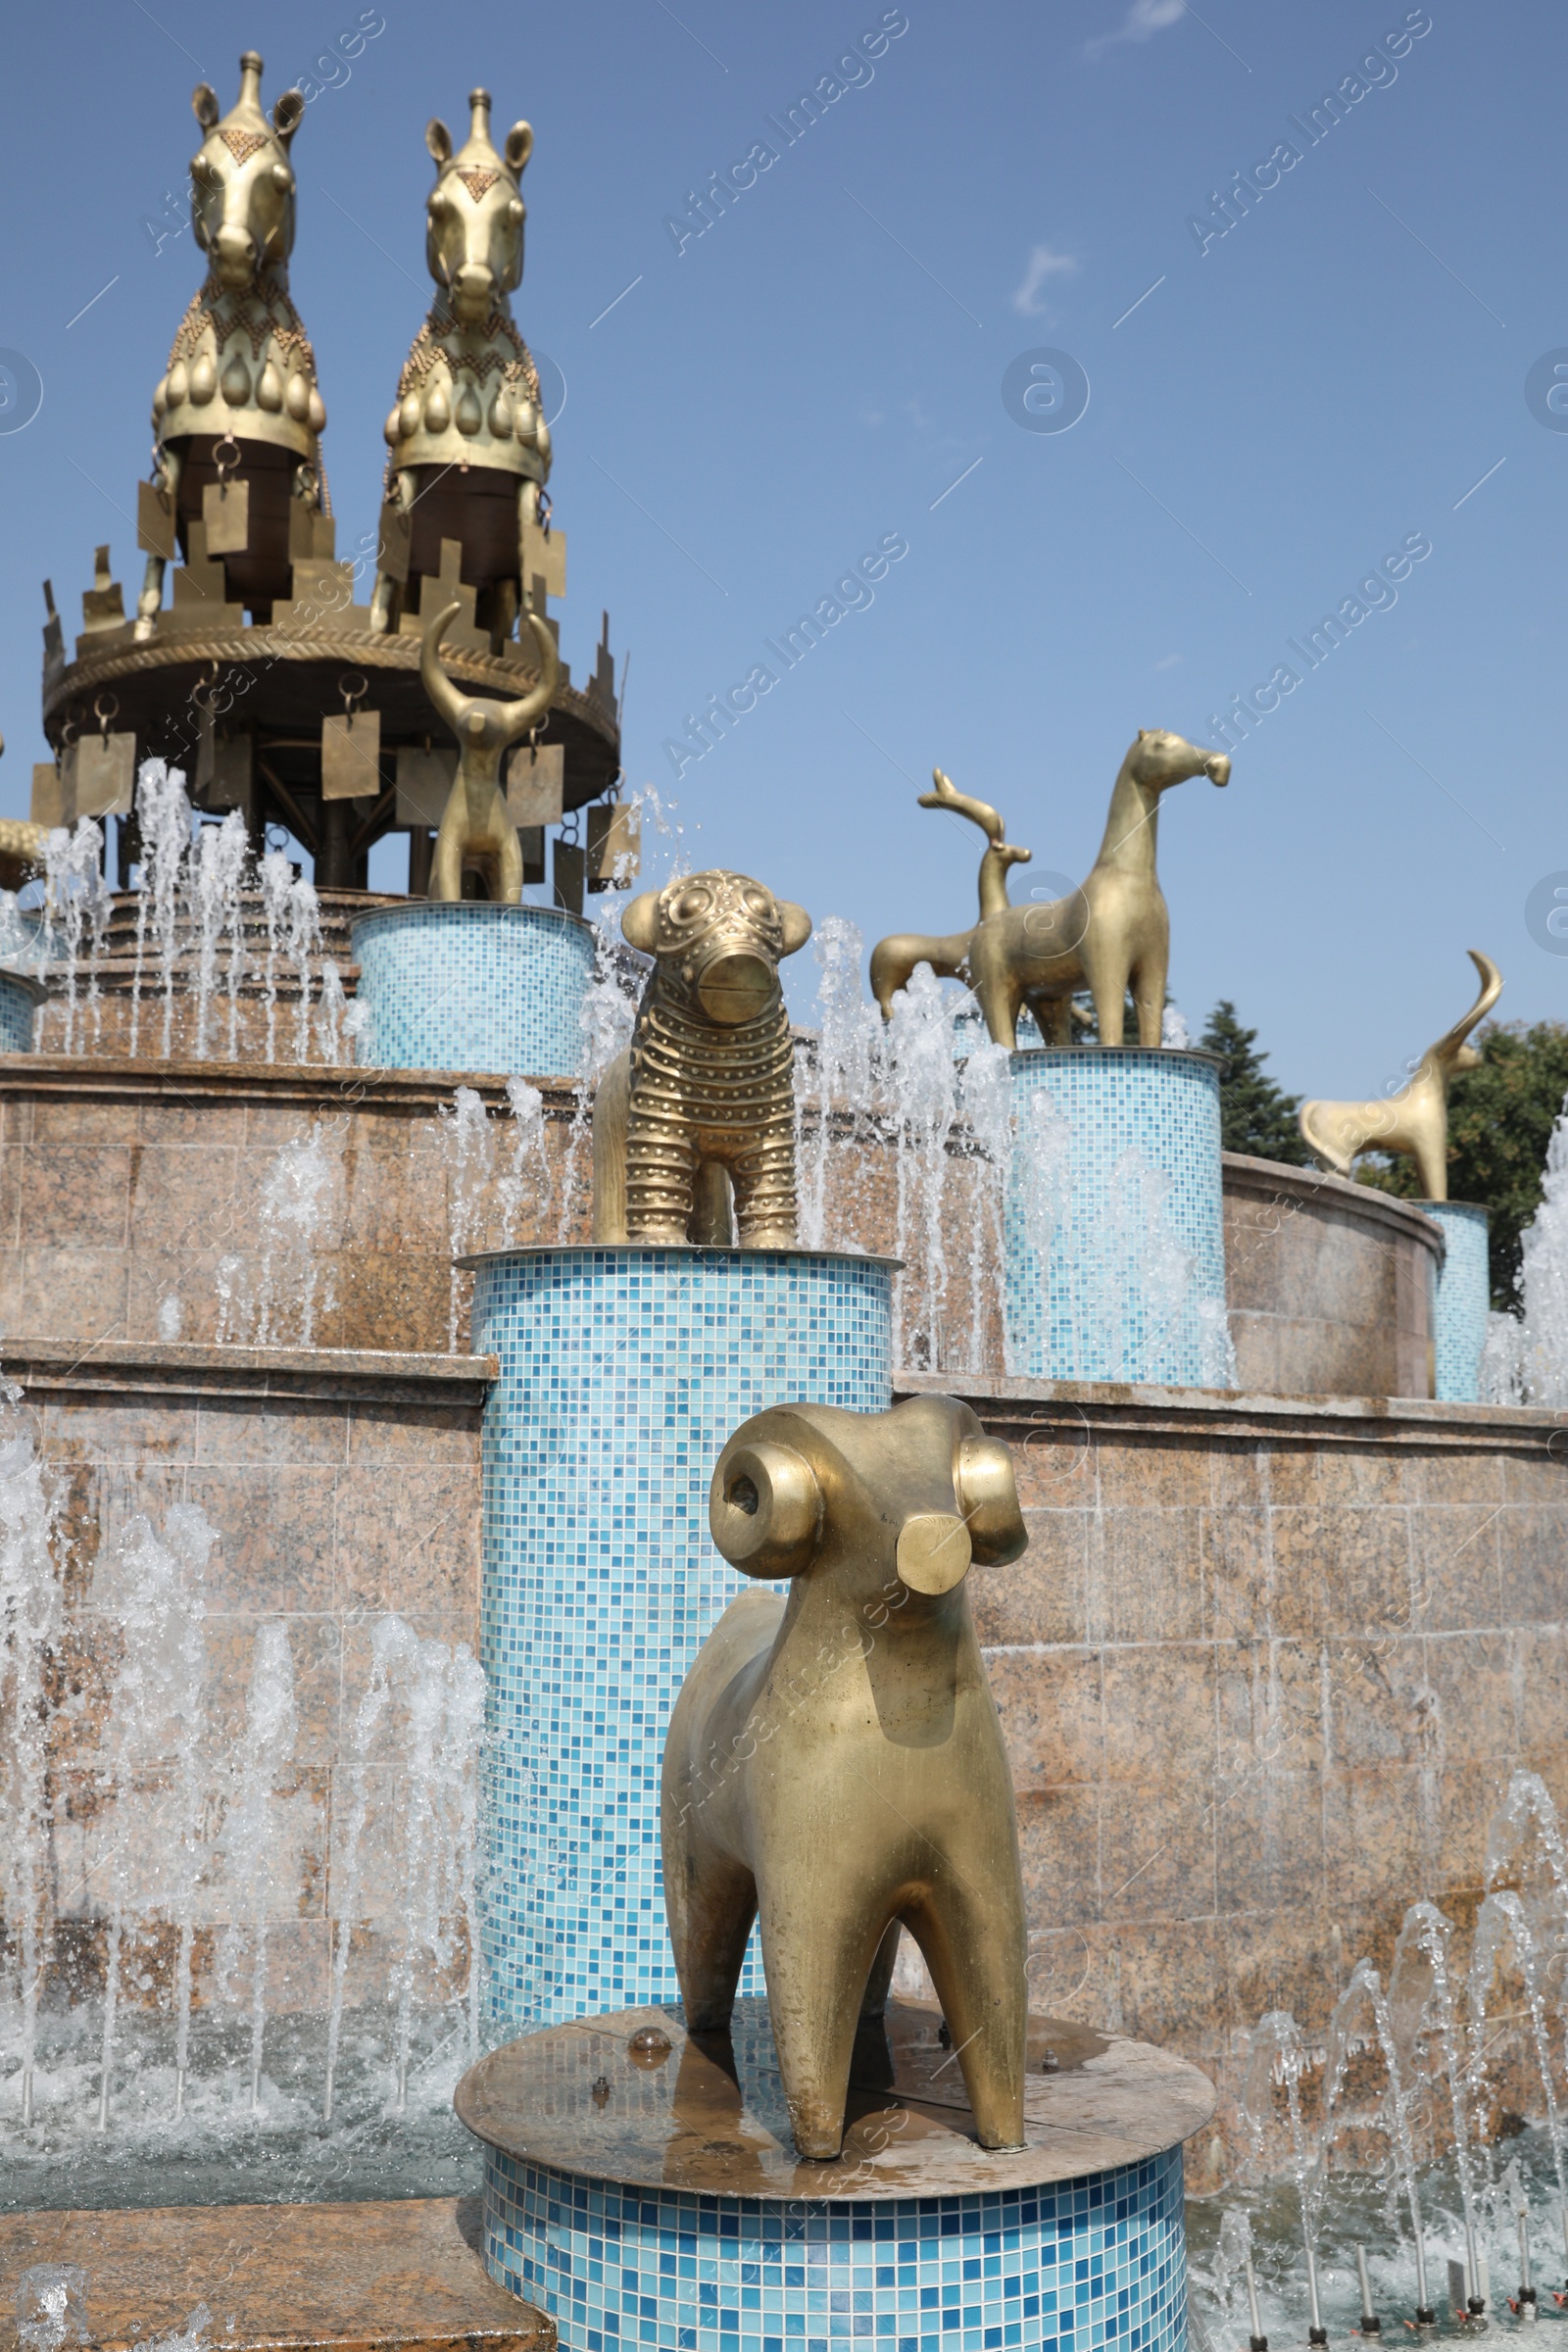 Photo of Kutaisi, Georgia - September 2, 2022: Picturesque view of beautiful Colchis fountain